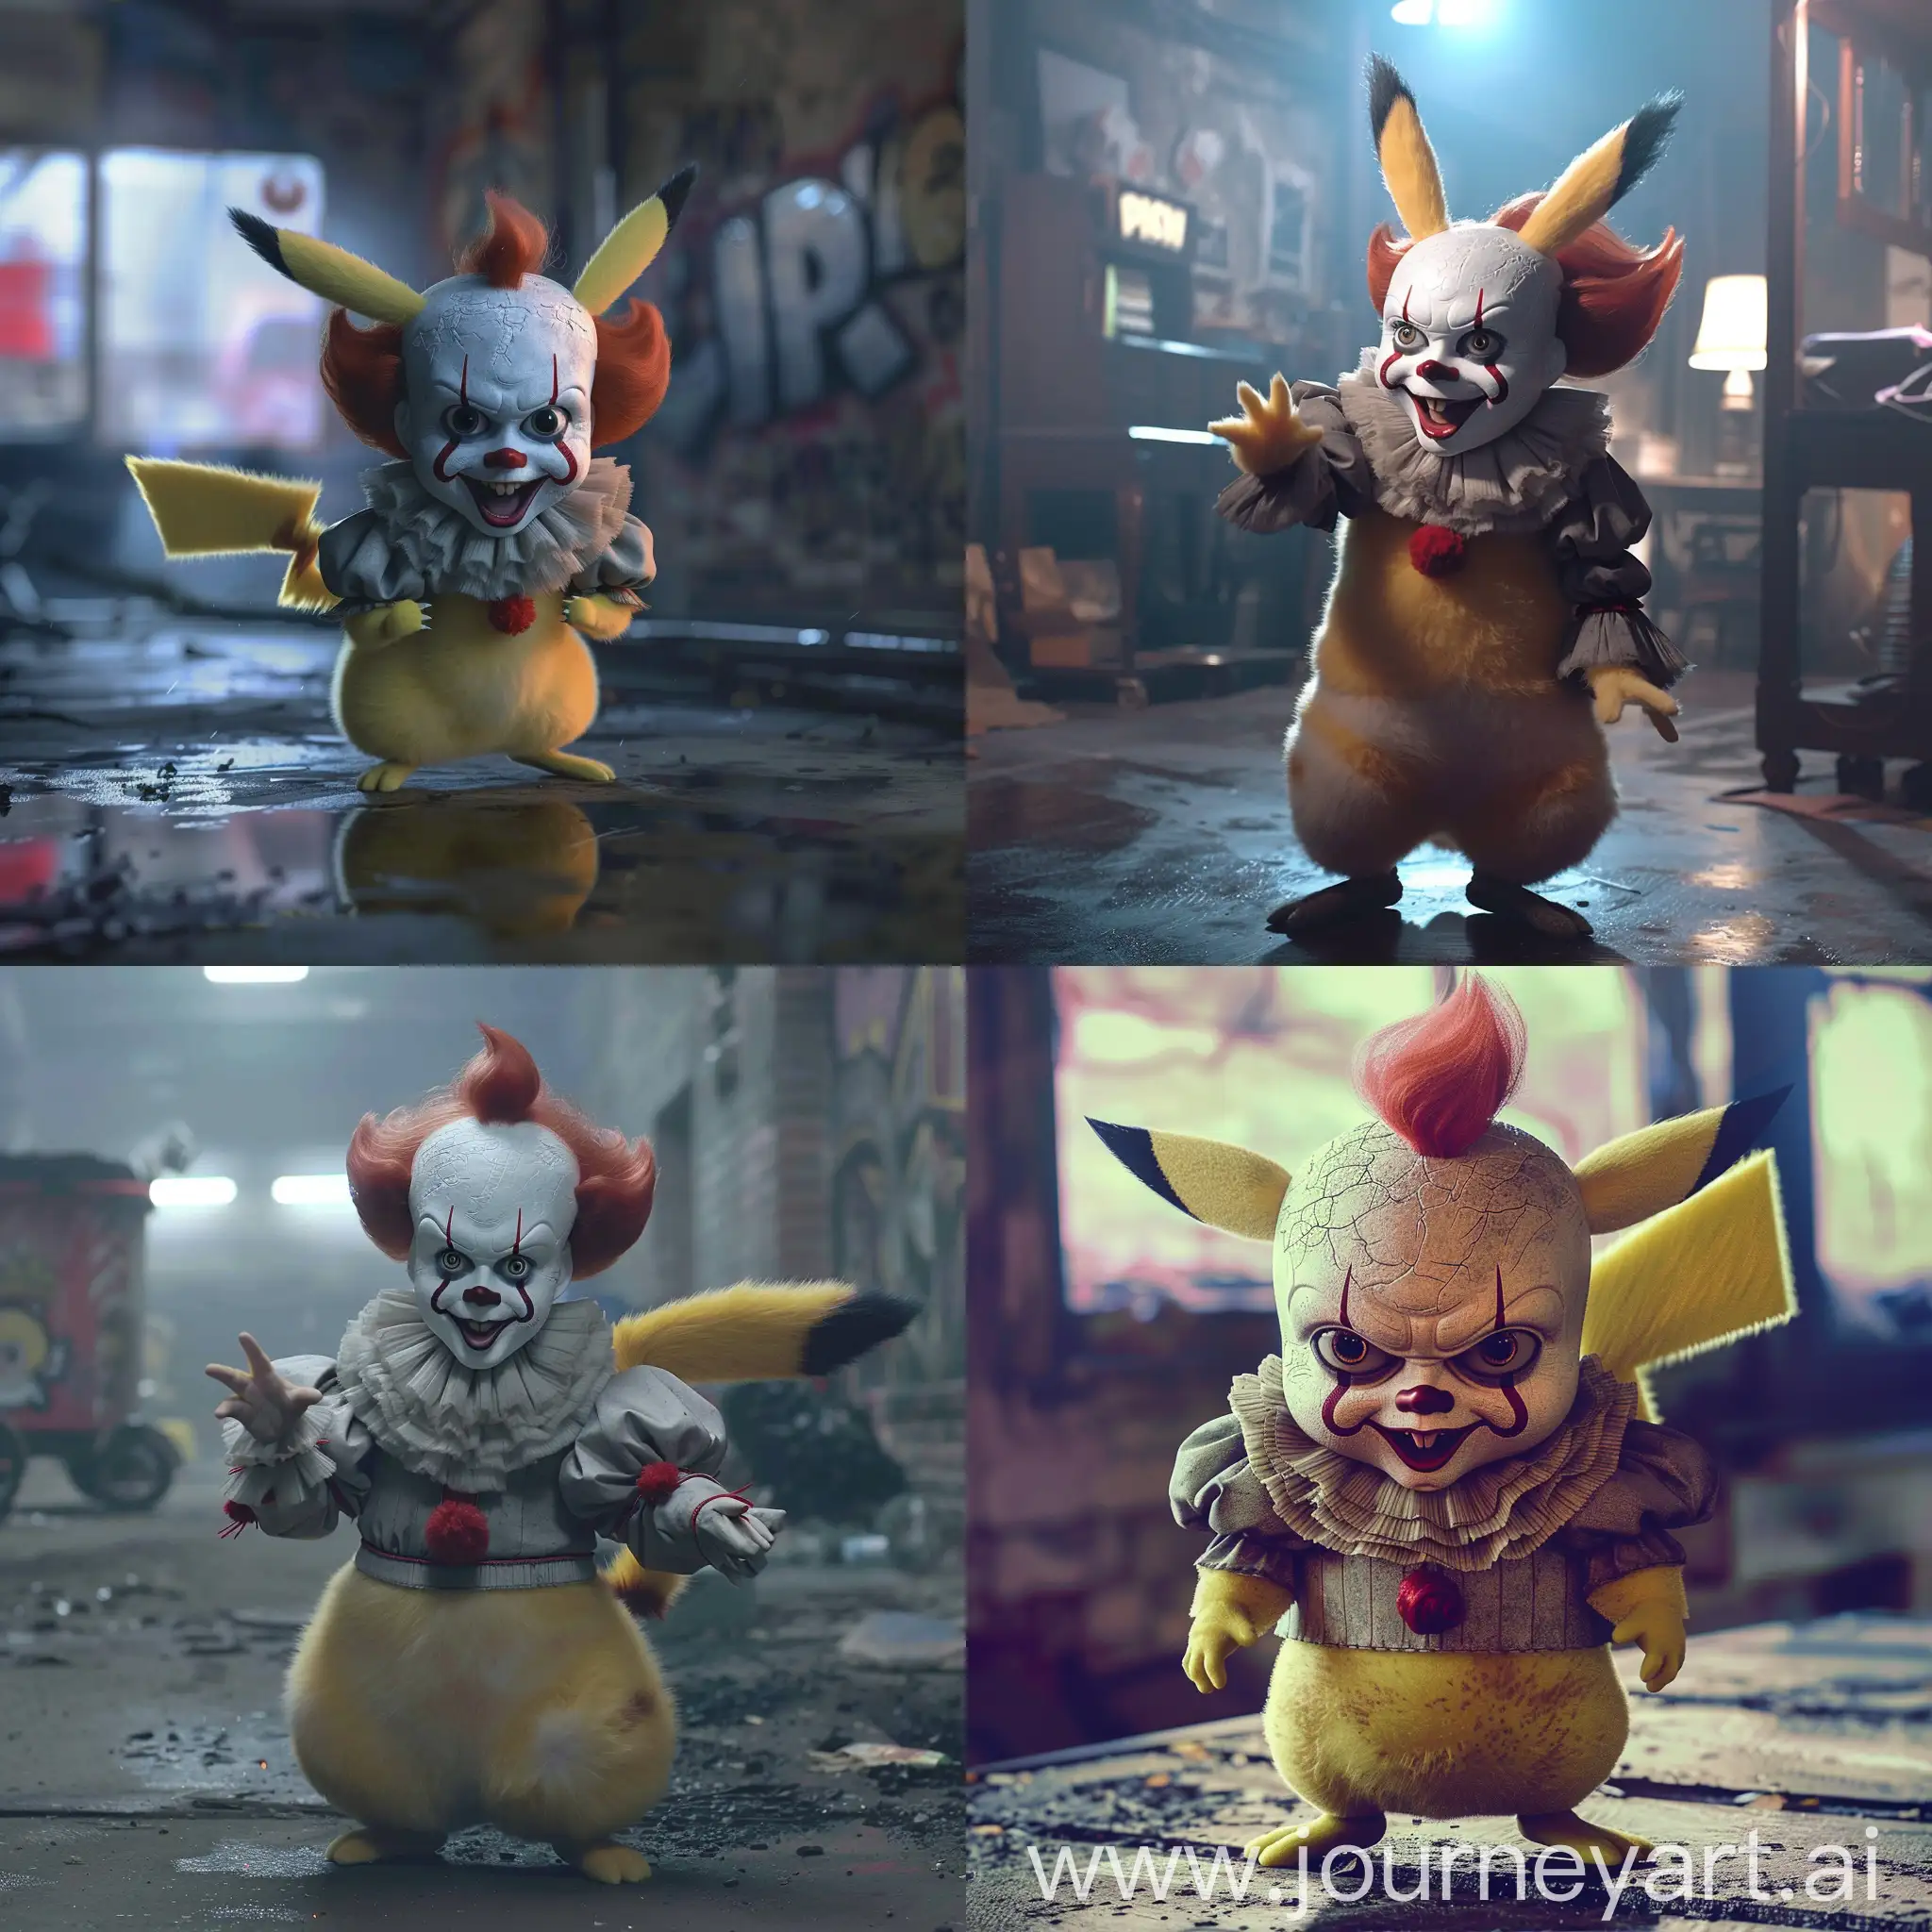 Pixar-Cartoon-Scene-Pikachu-as-Pennywise-in-a-Whimsical-Setting